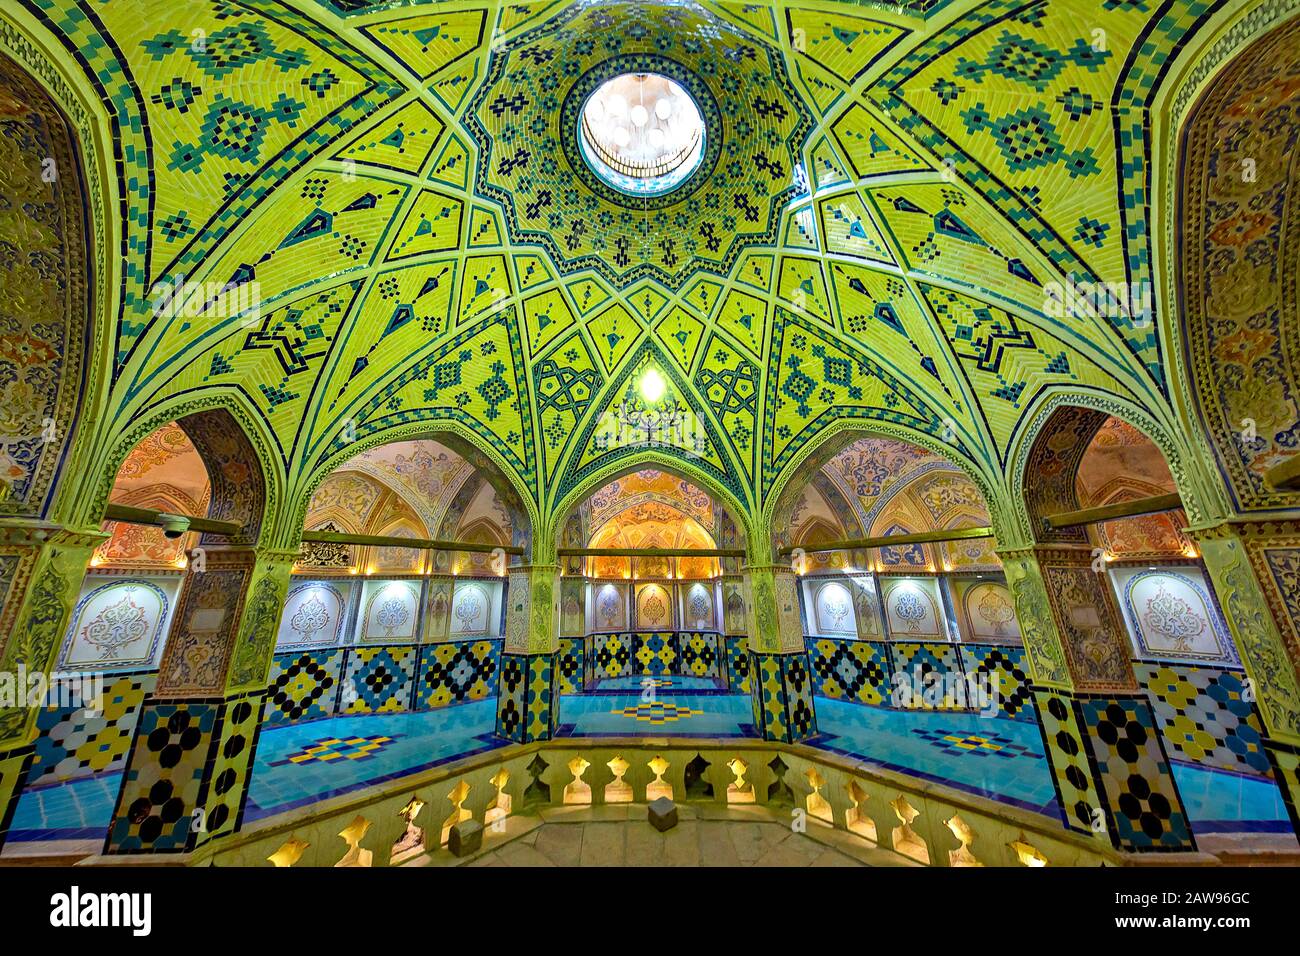 Historical bath house known as Sultan Amir Ahmed Bath, in the city of Kashan, Iran Stock Photo